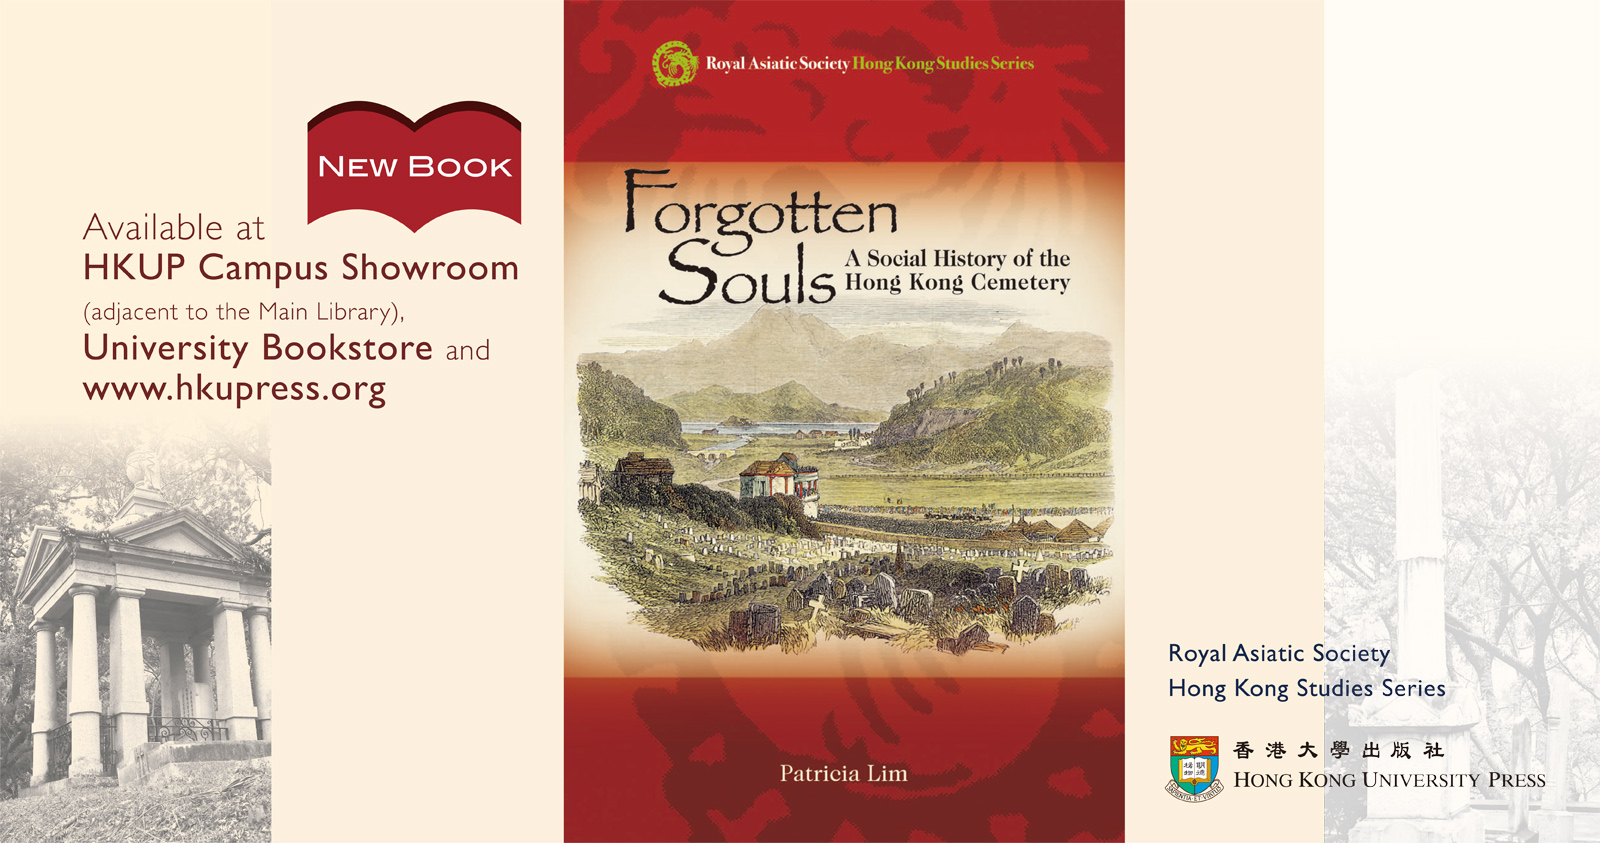 New Book from HKU Press - Forgotten Souls